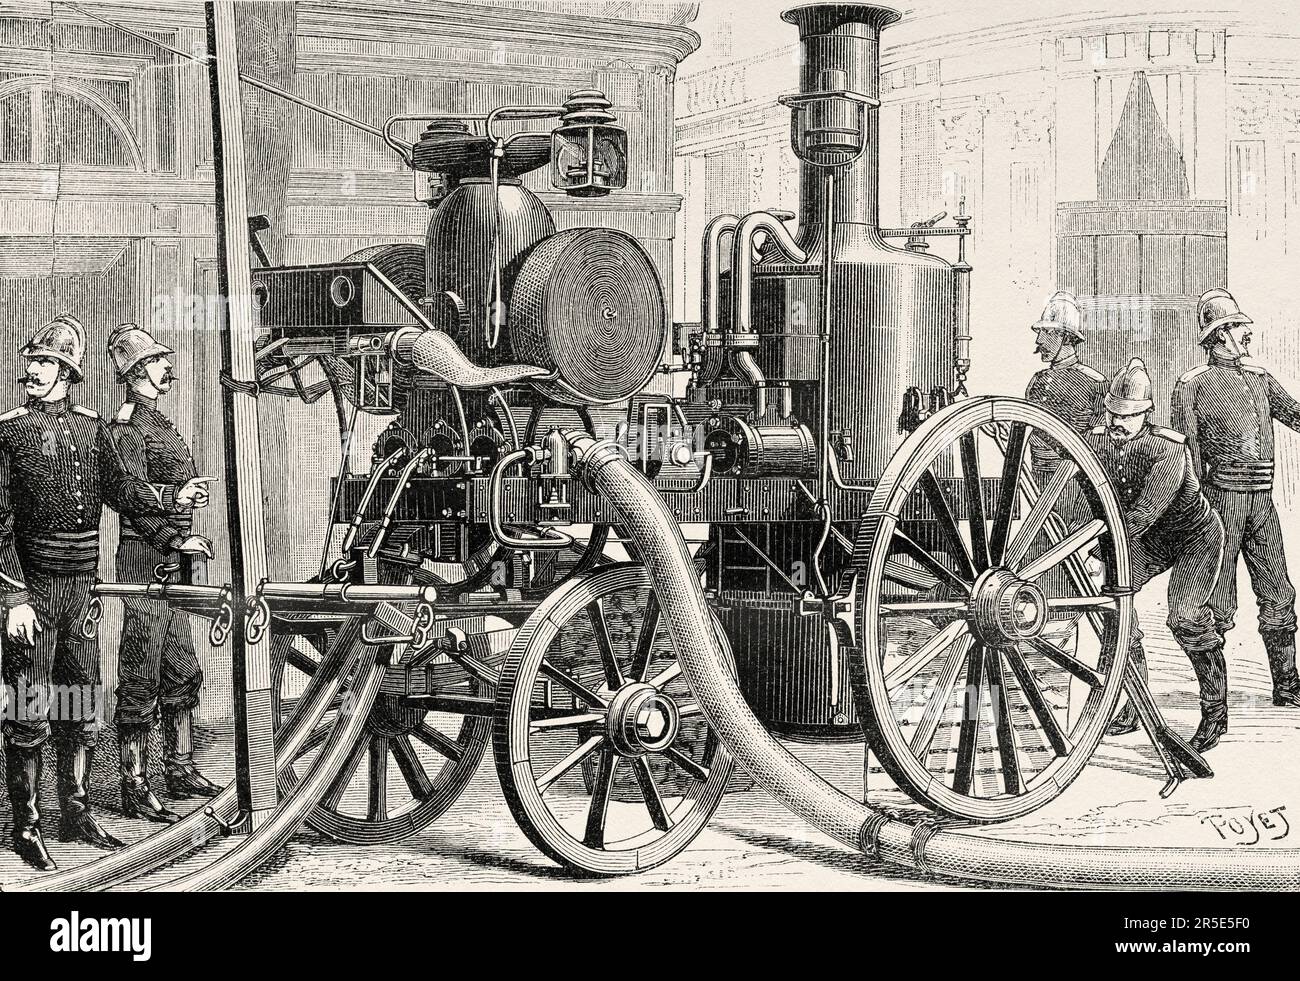 Paris fire brigade equipment materials, Thirion system Steam operated fire pump, France. Old 19th century engraving from La Nature 1887 Stock Photo